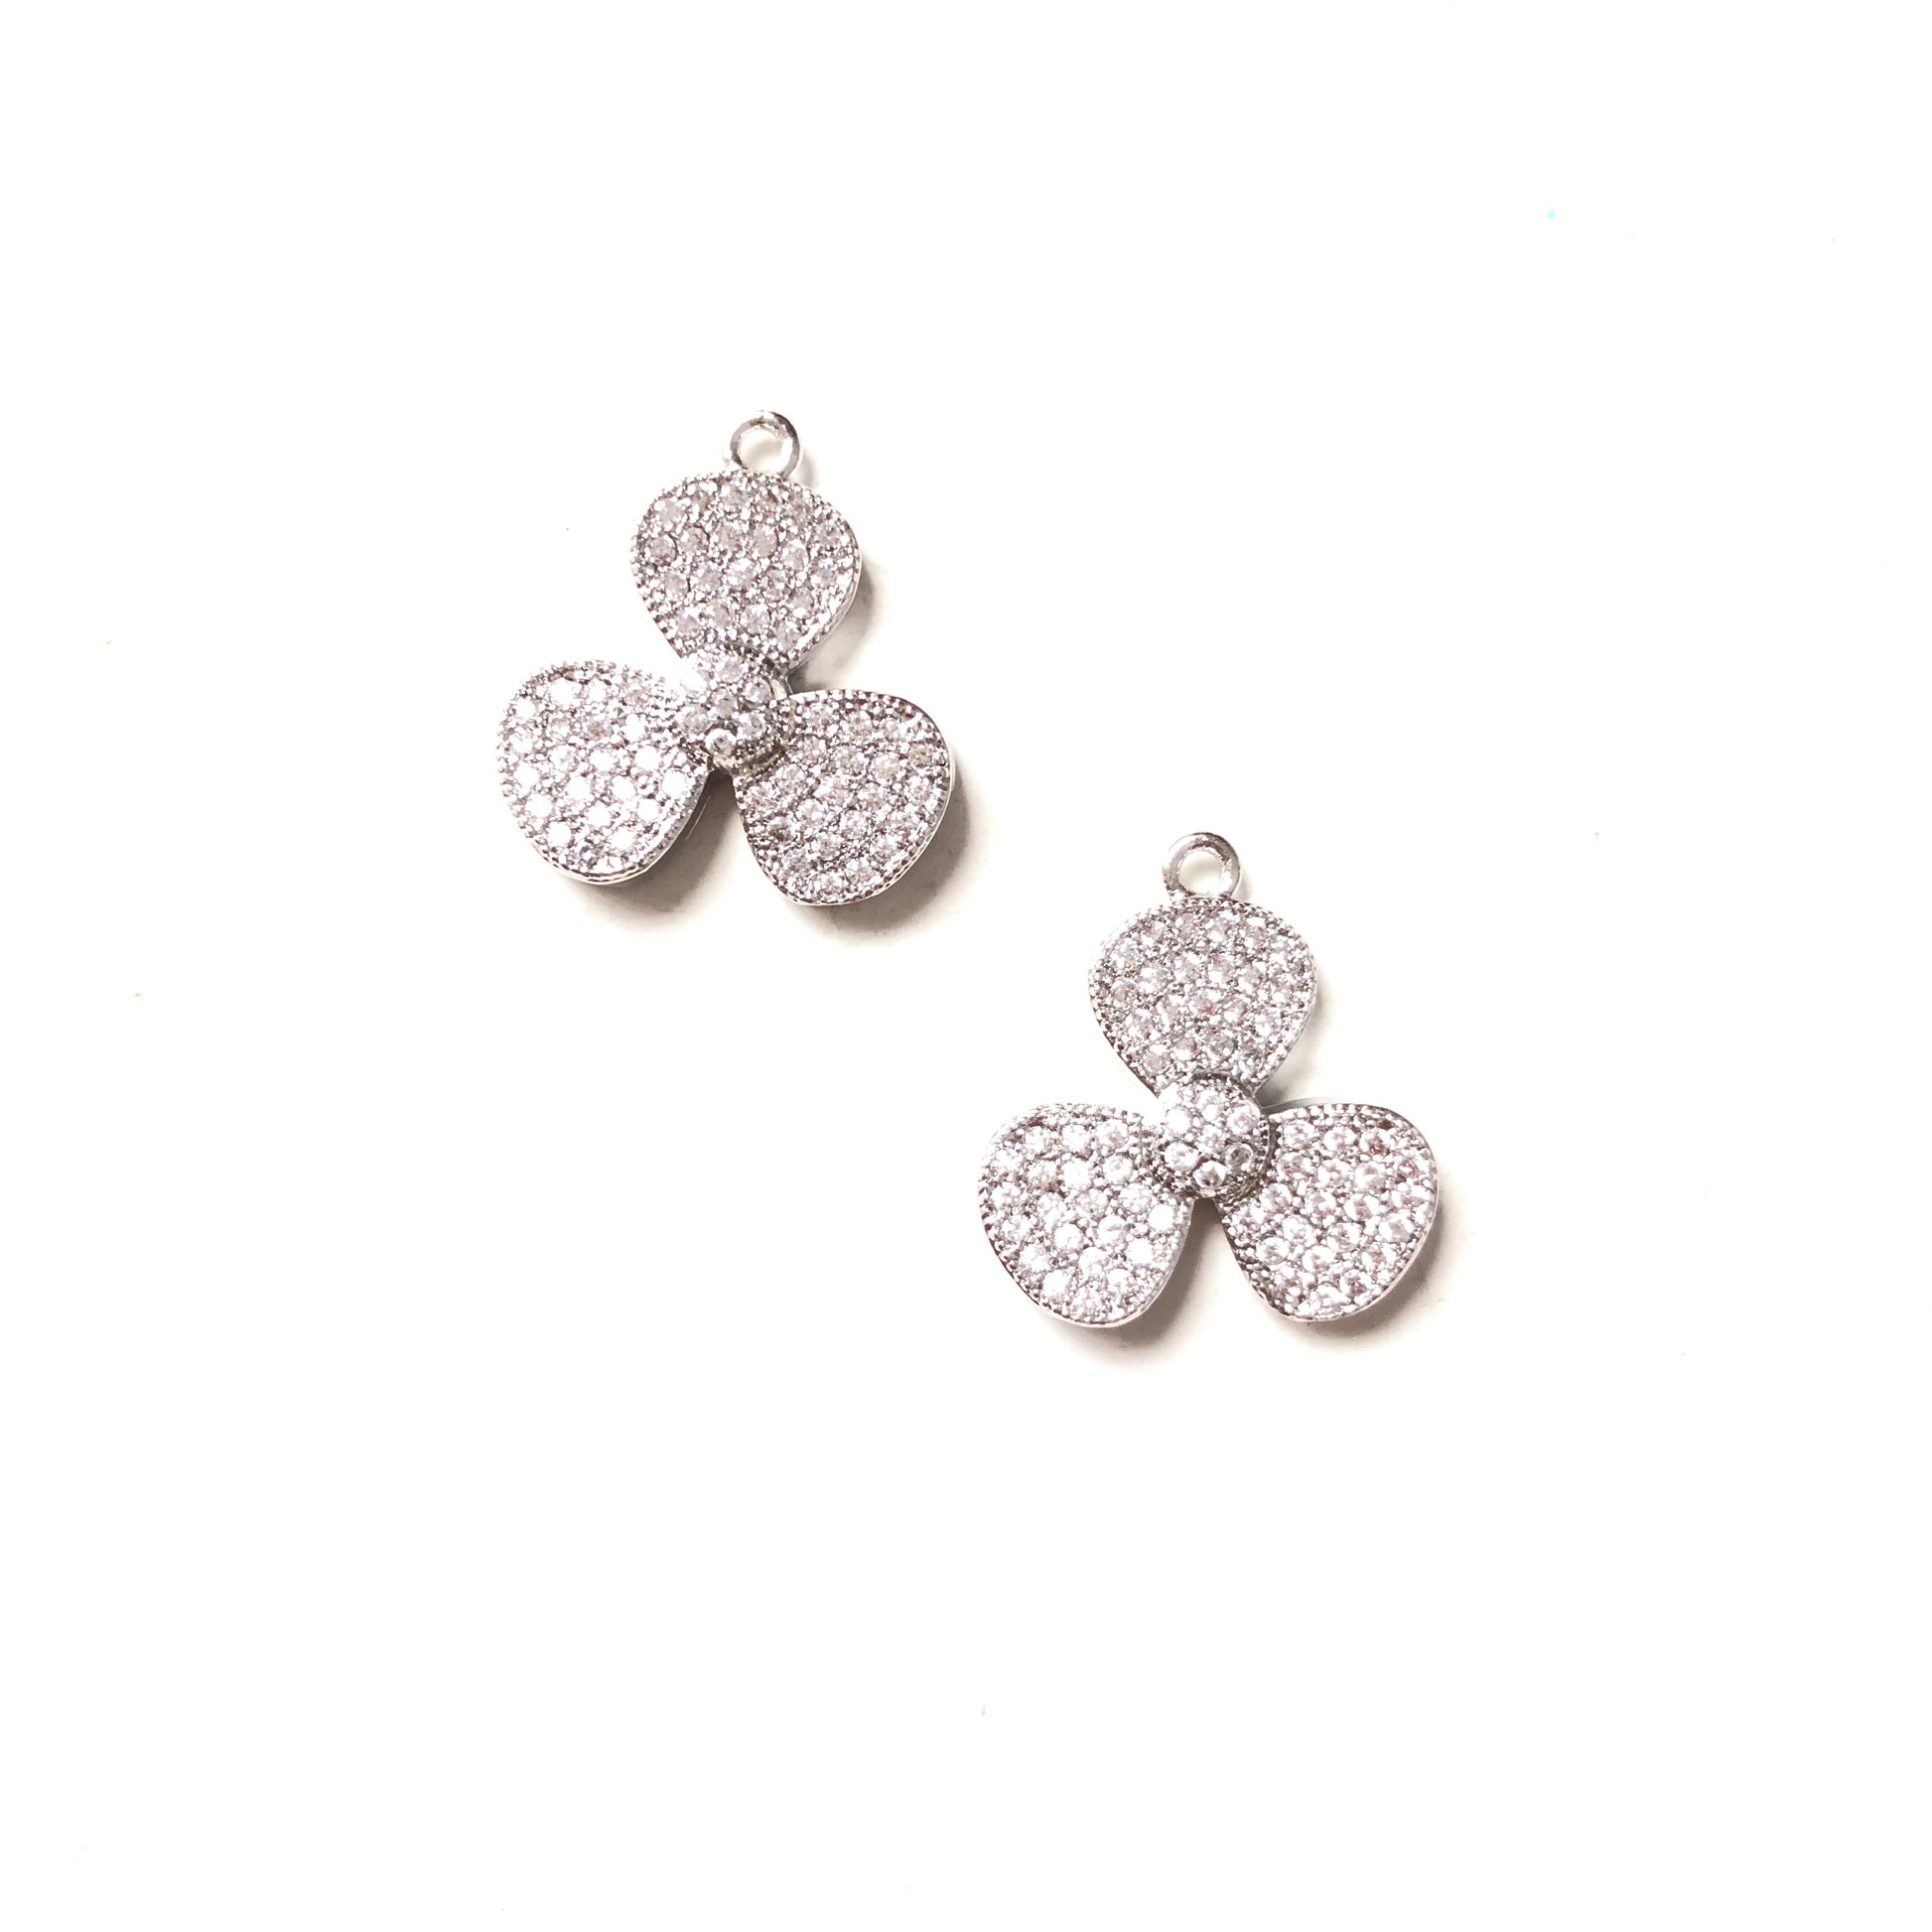 10pcs/lot 18*17mm CZ Paved Flower Charms Silver CZ Paved Charms Flowers On Sale Charms Beads Beyond